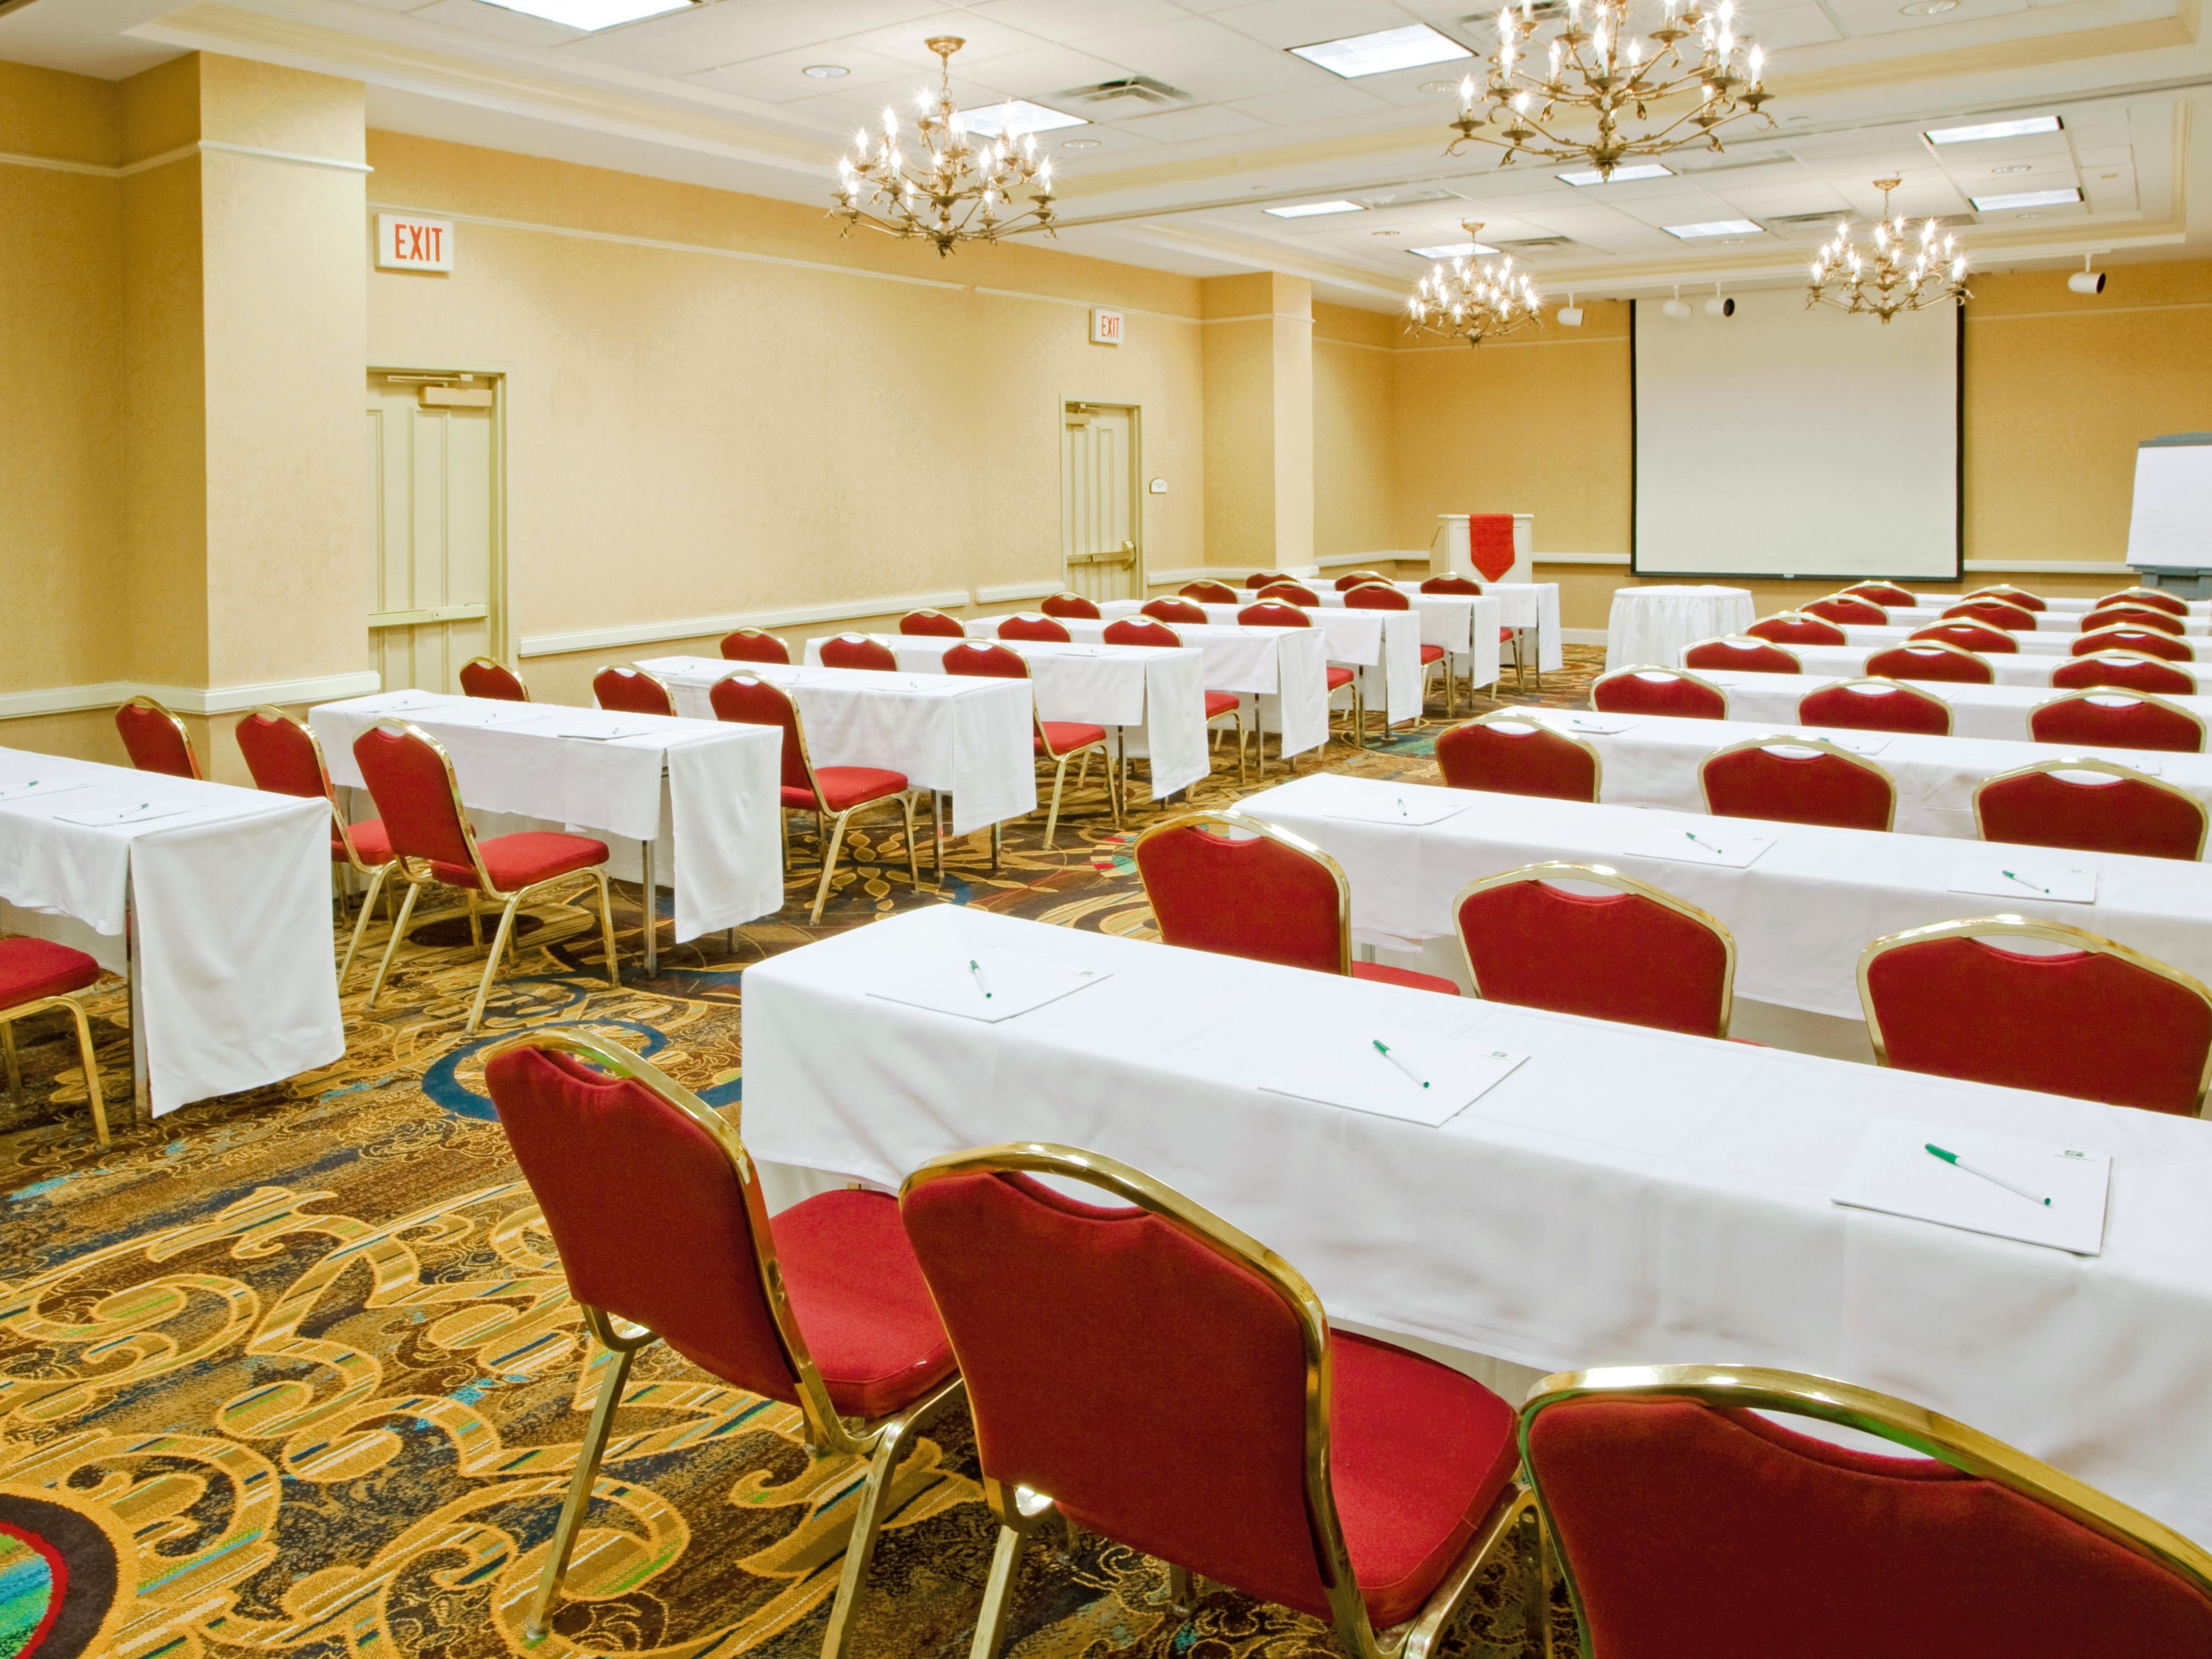 If you're looking for a hotel near Washington D.C. that can hold your event, our function rooms comprise over 2,550 square feet and are perfect for a meeting or social event. 